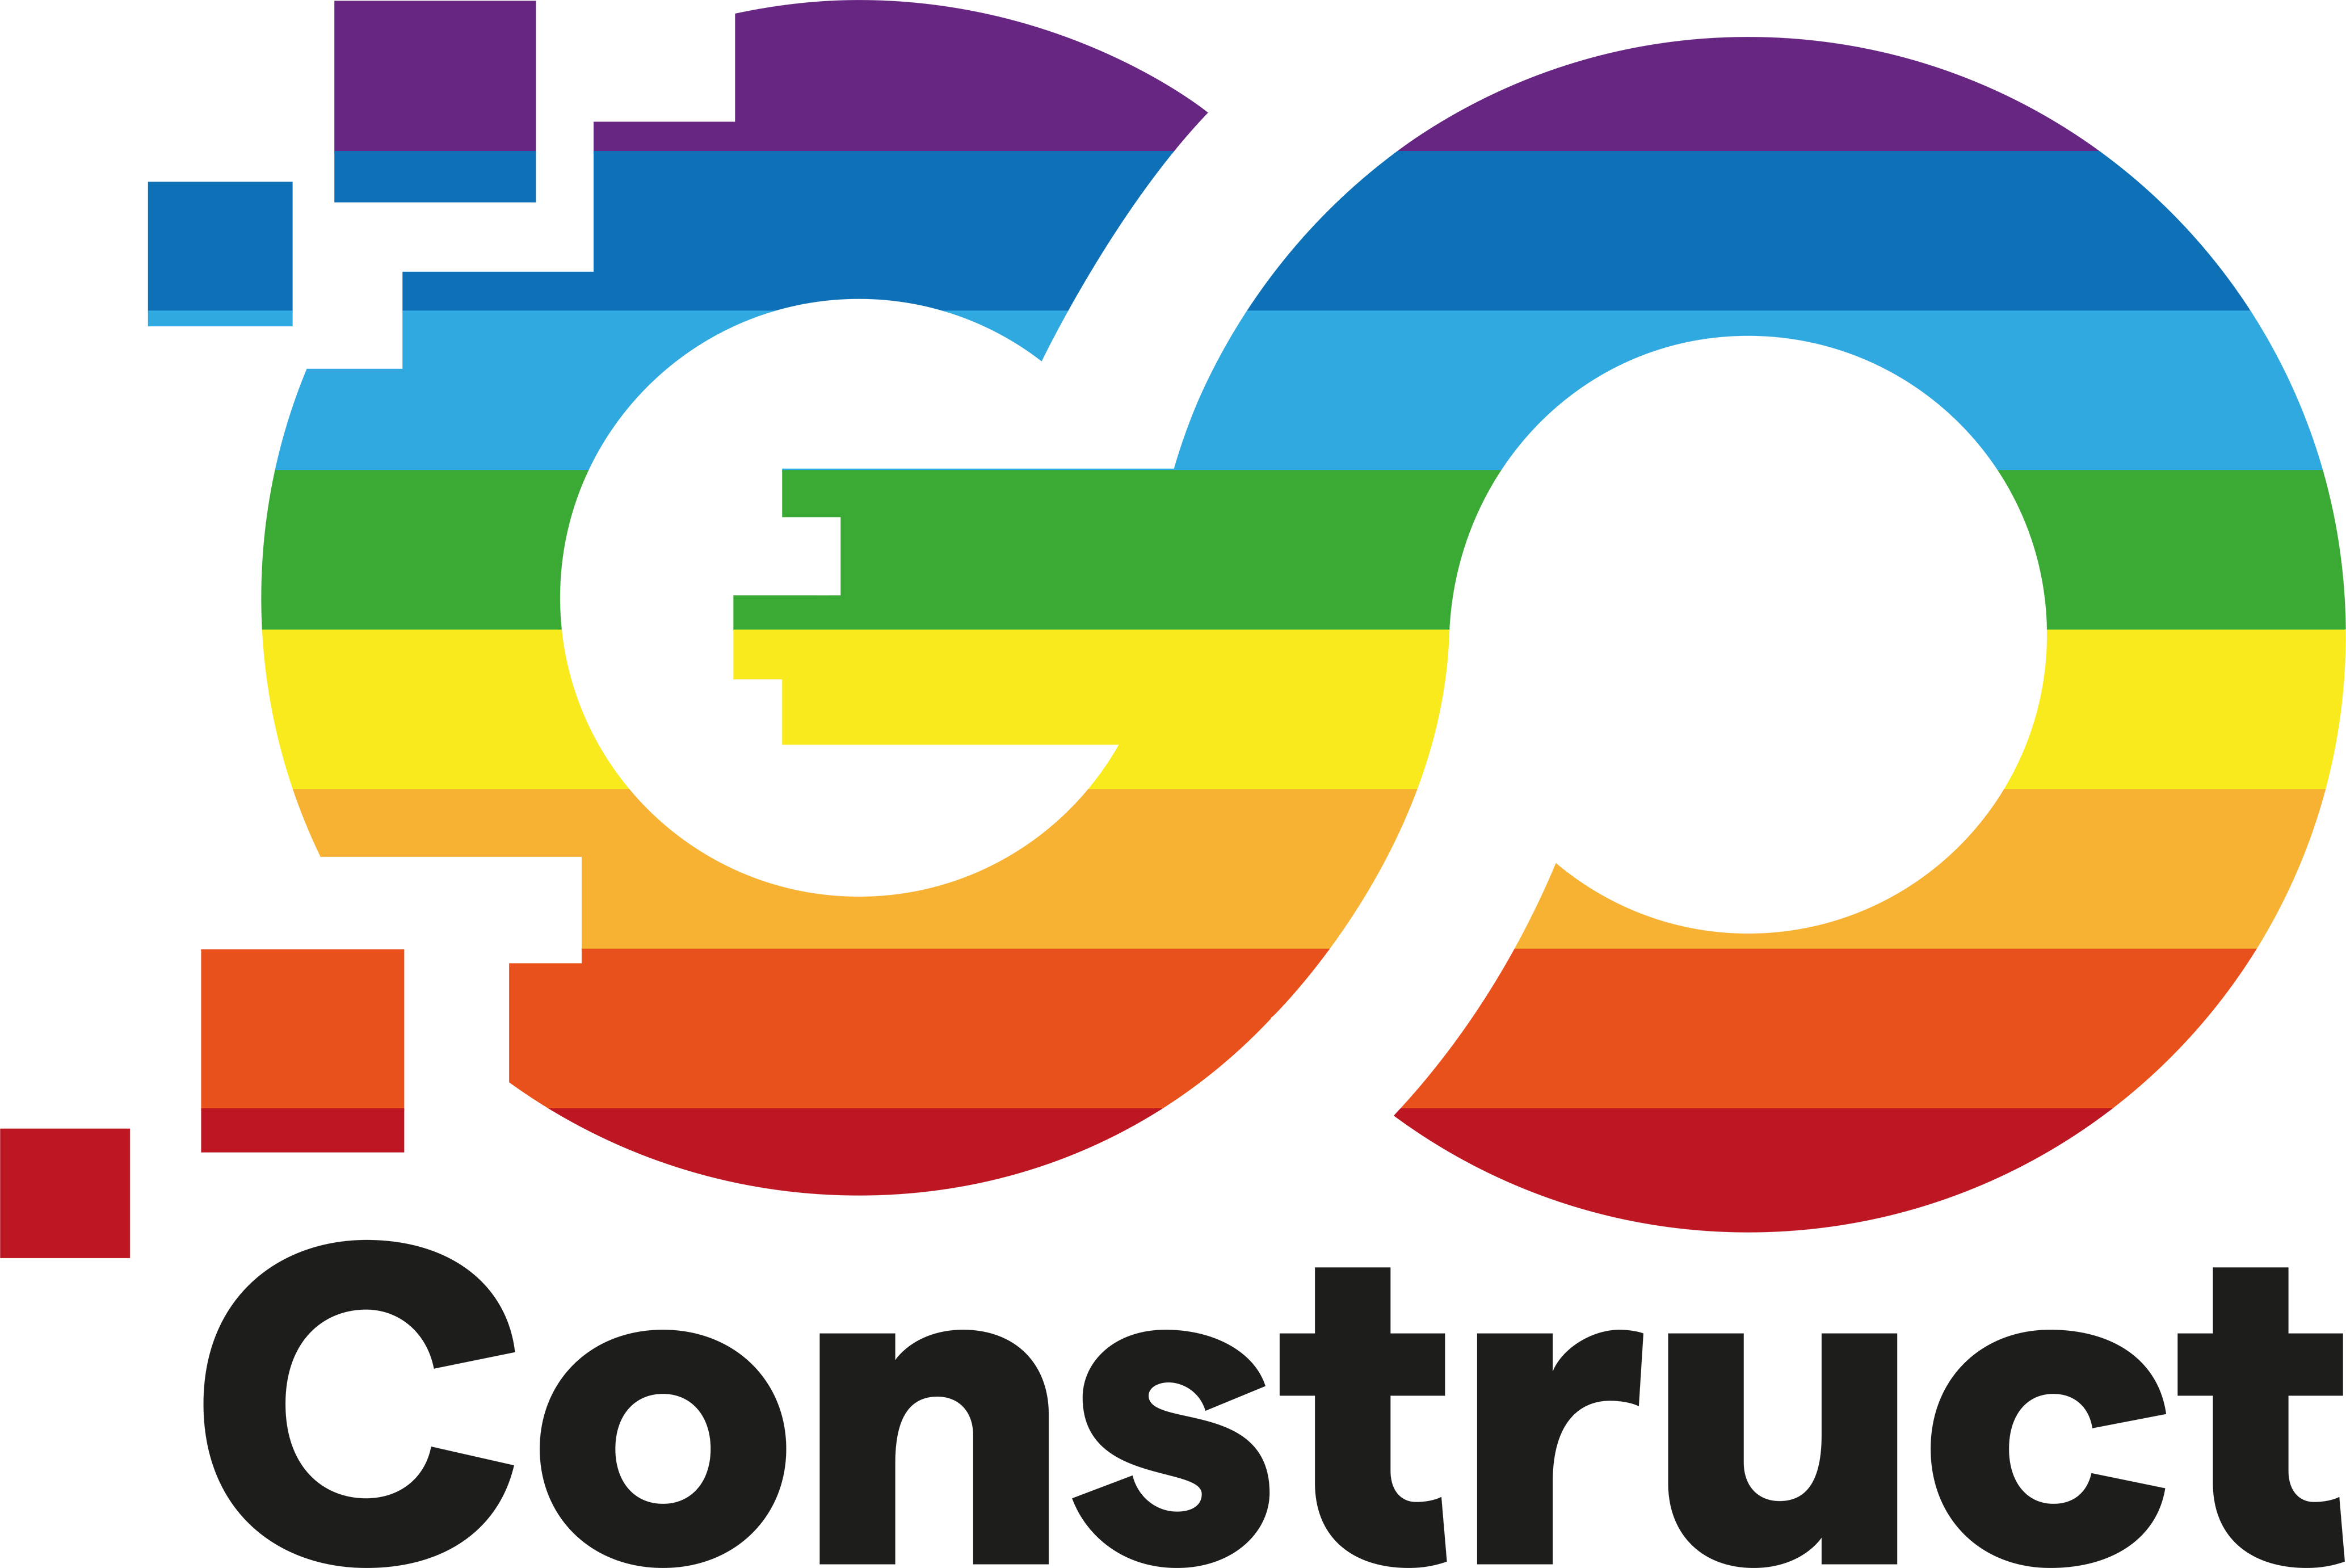 Go Construct - Industry led, funded by the CITB levy